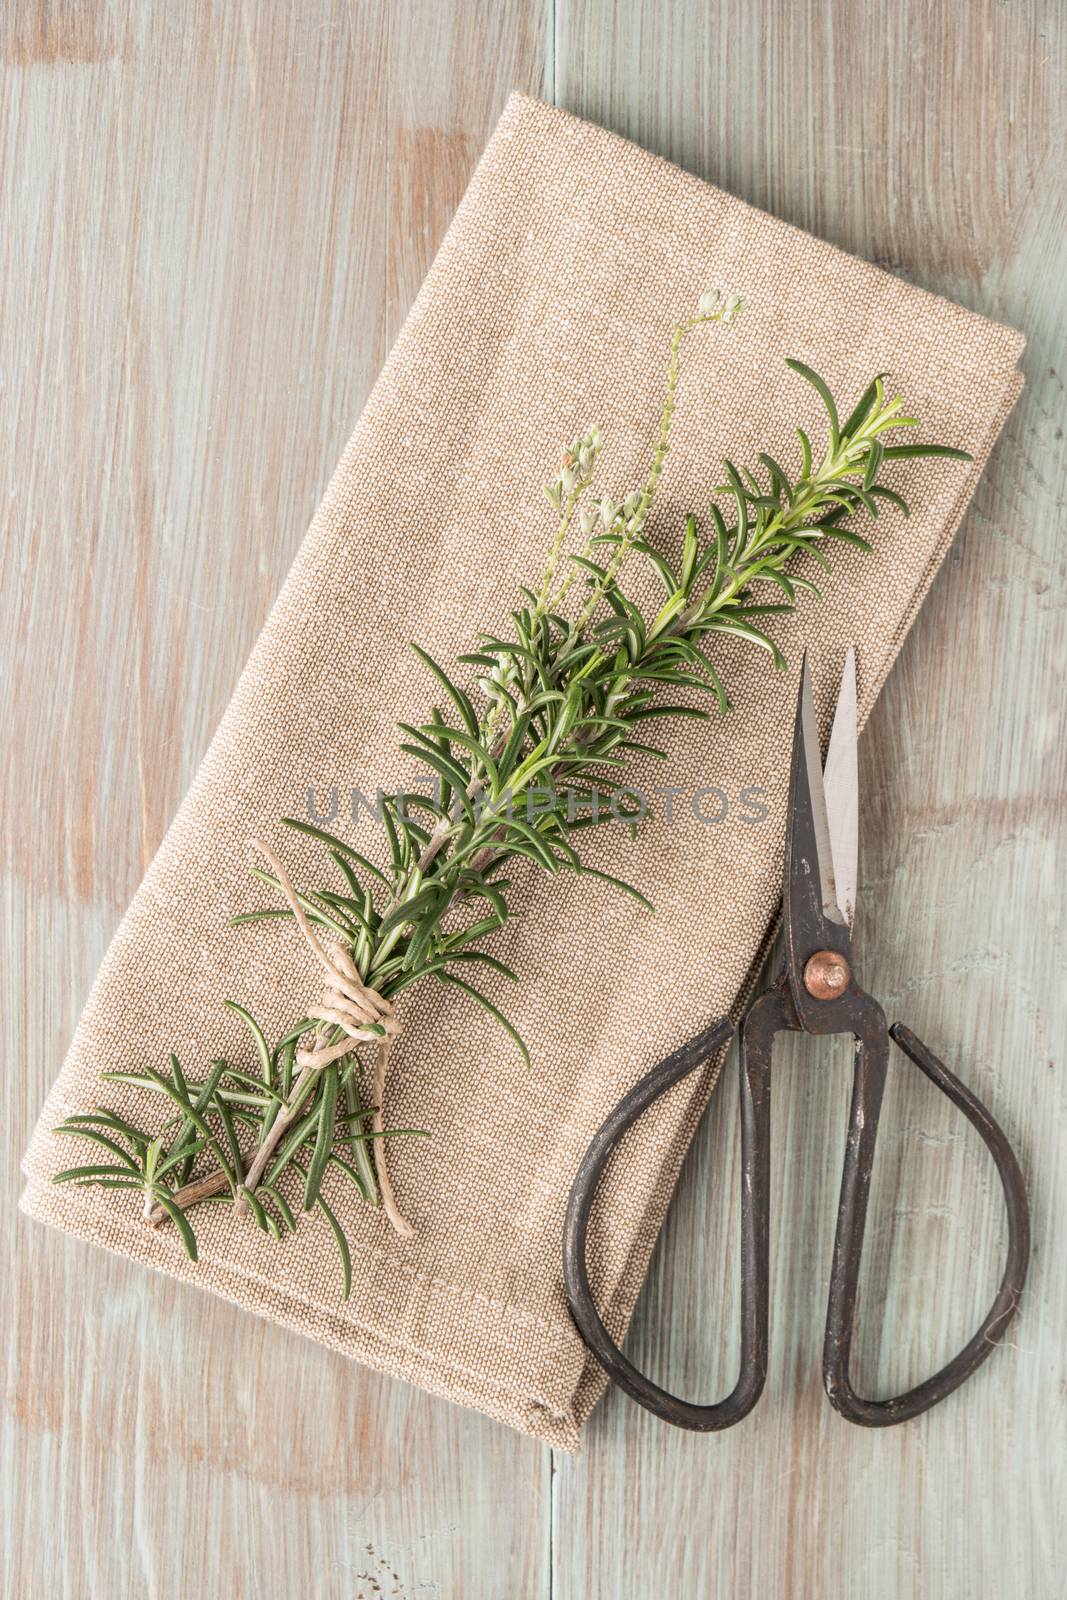 Bunch of fresh of garden rosemary on wooden table, rustic style, by AnaMarques